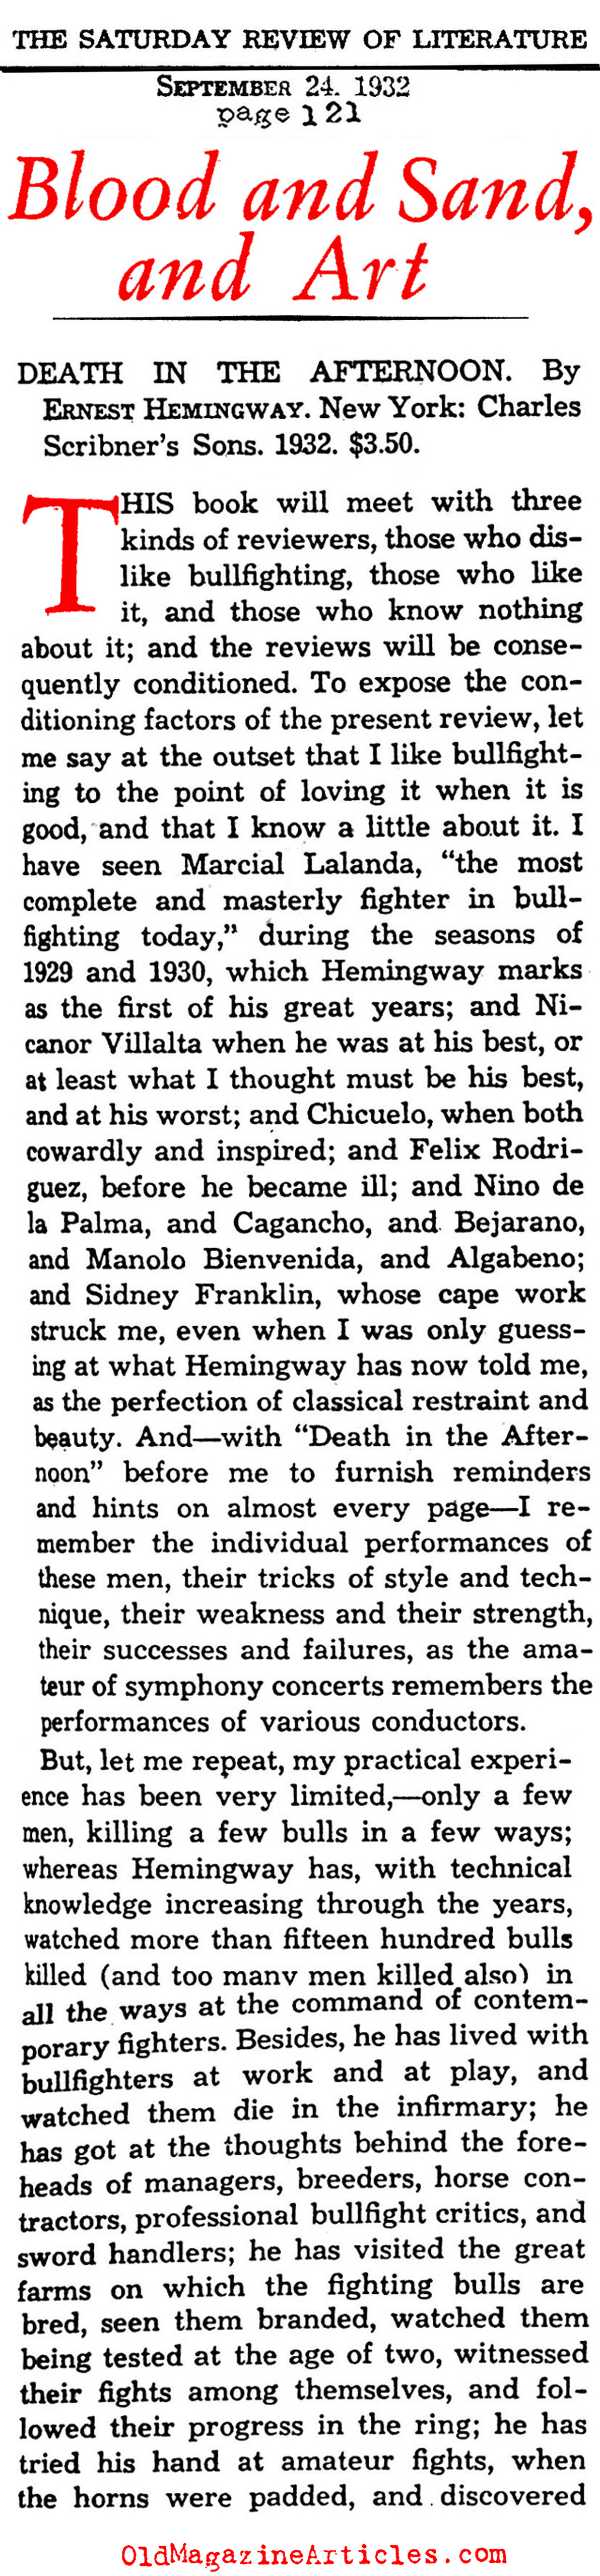 Hemingway's <I>Death in the Afternoon</I> (Saturday Review of Literature, 1932)